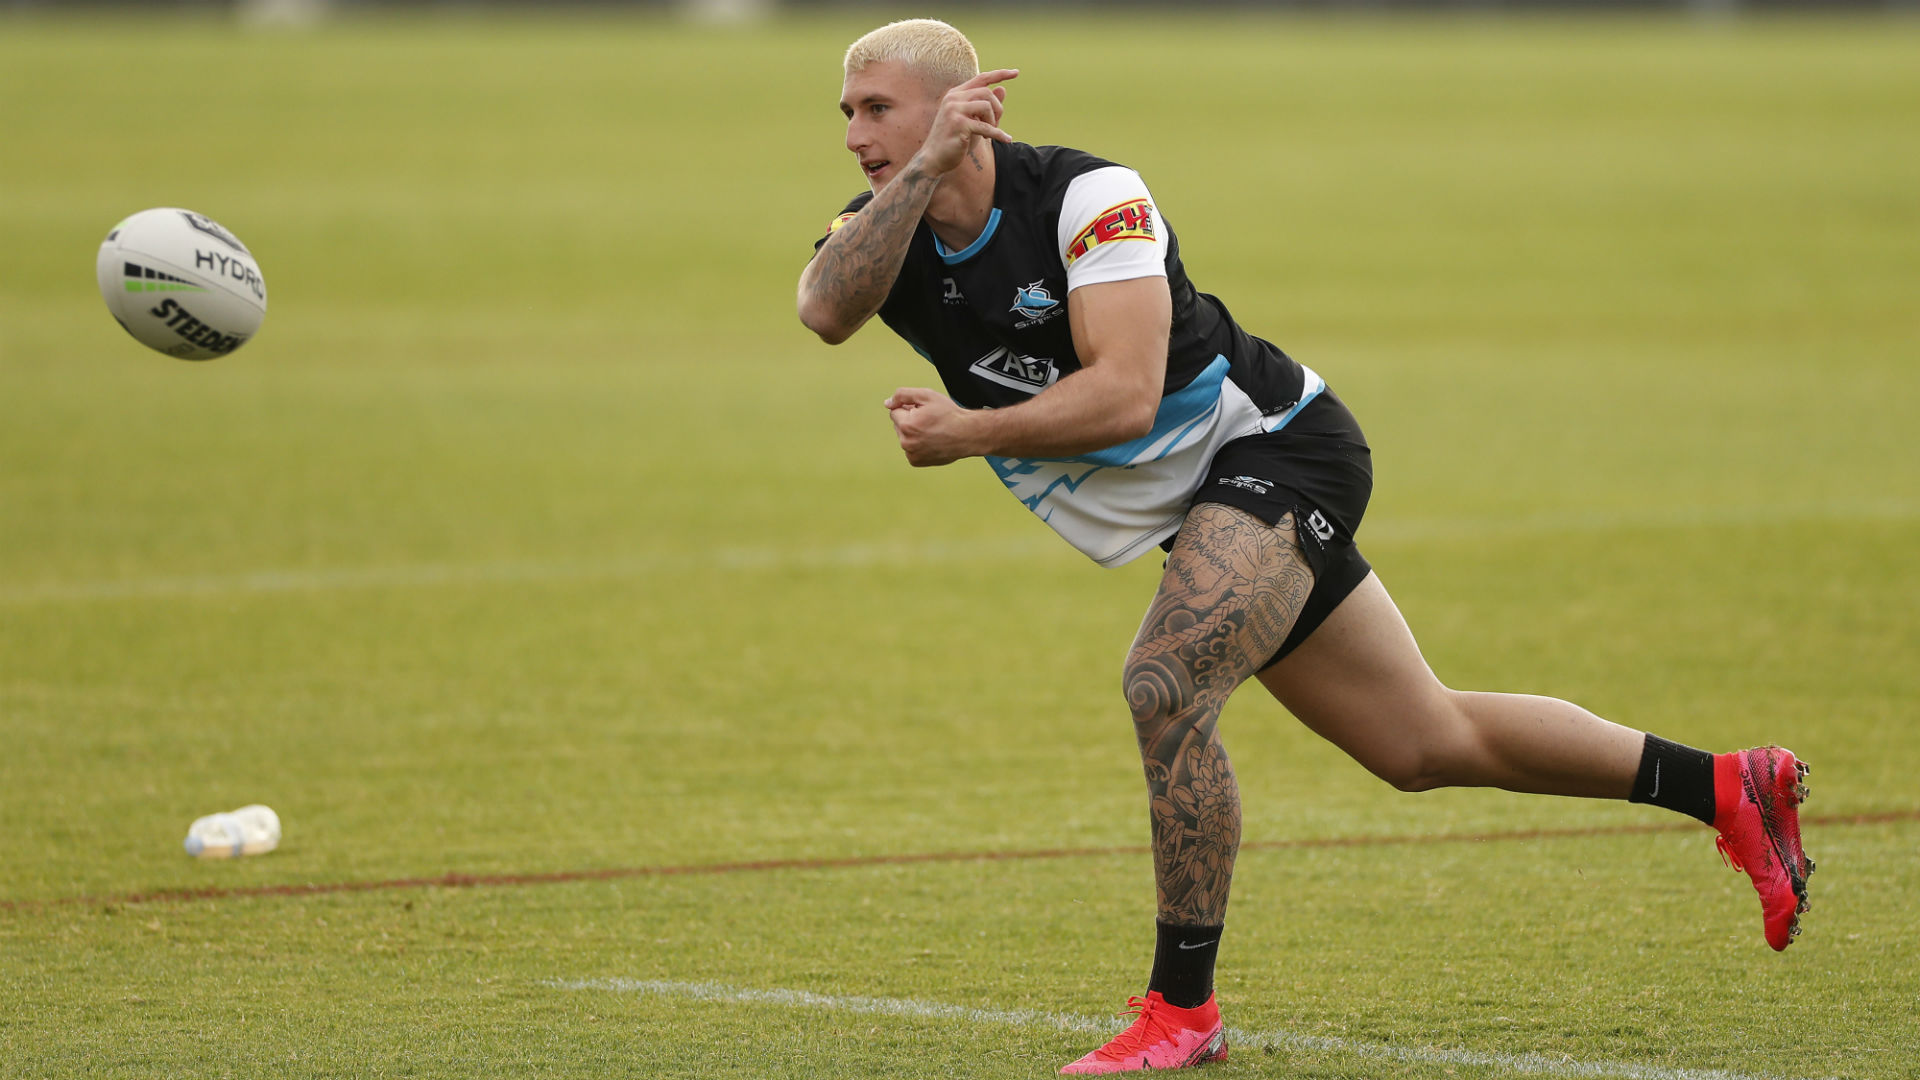 Bronson Xerri was provisionally suspended six months after a positive drugs test, leading to questions from the Cronulla Sharks.